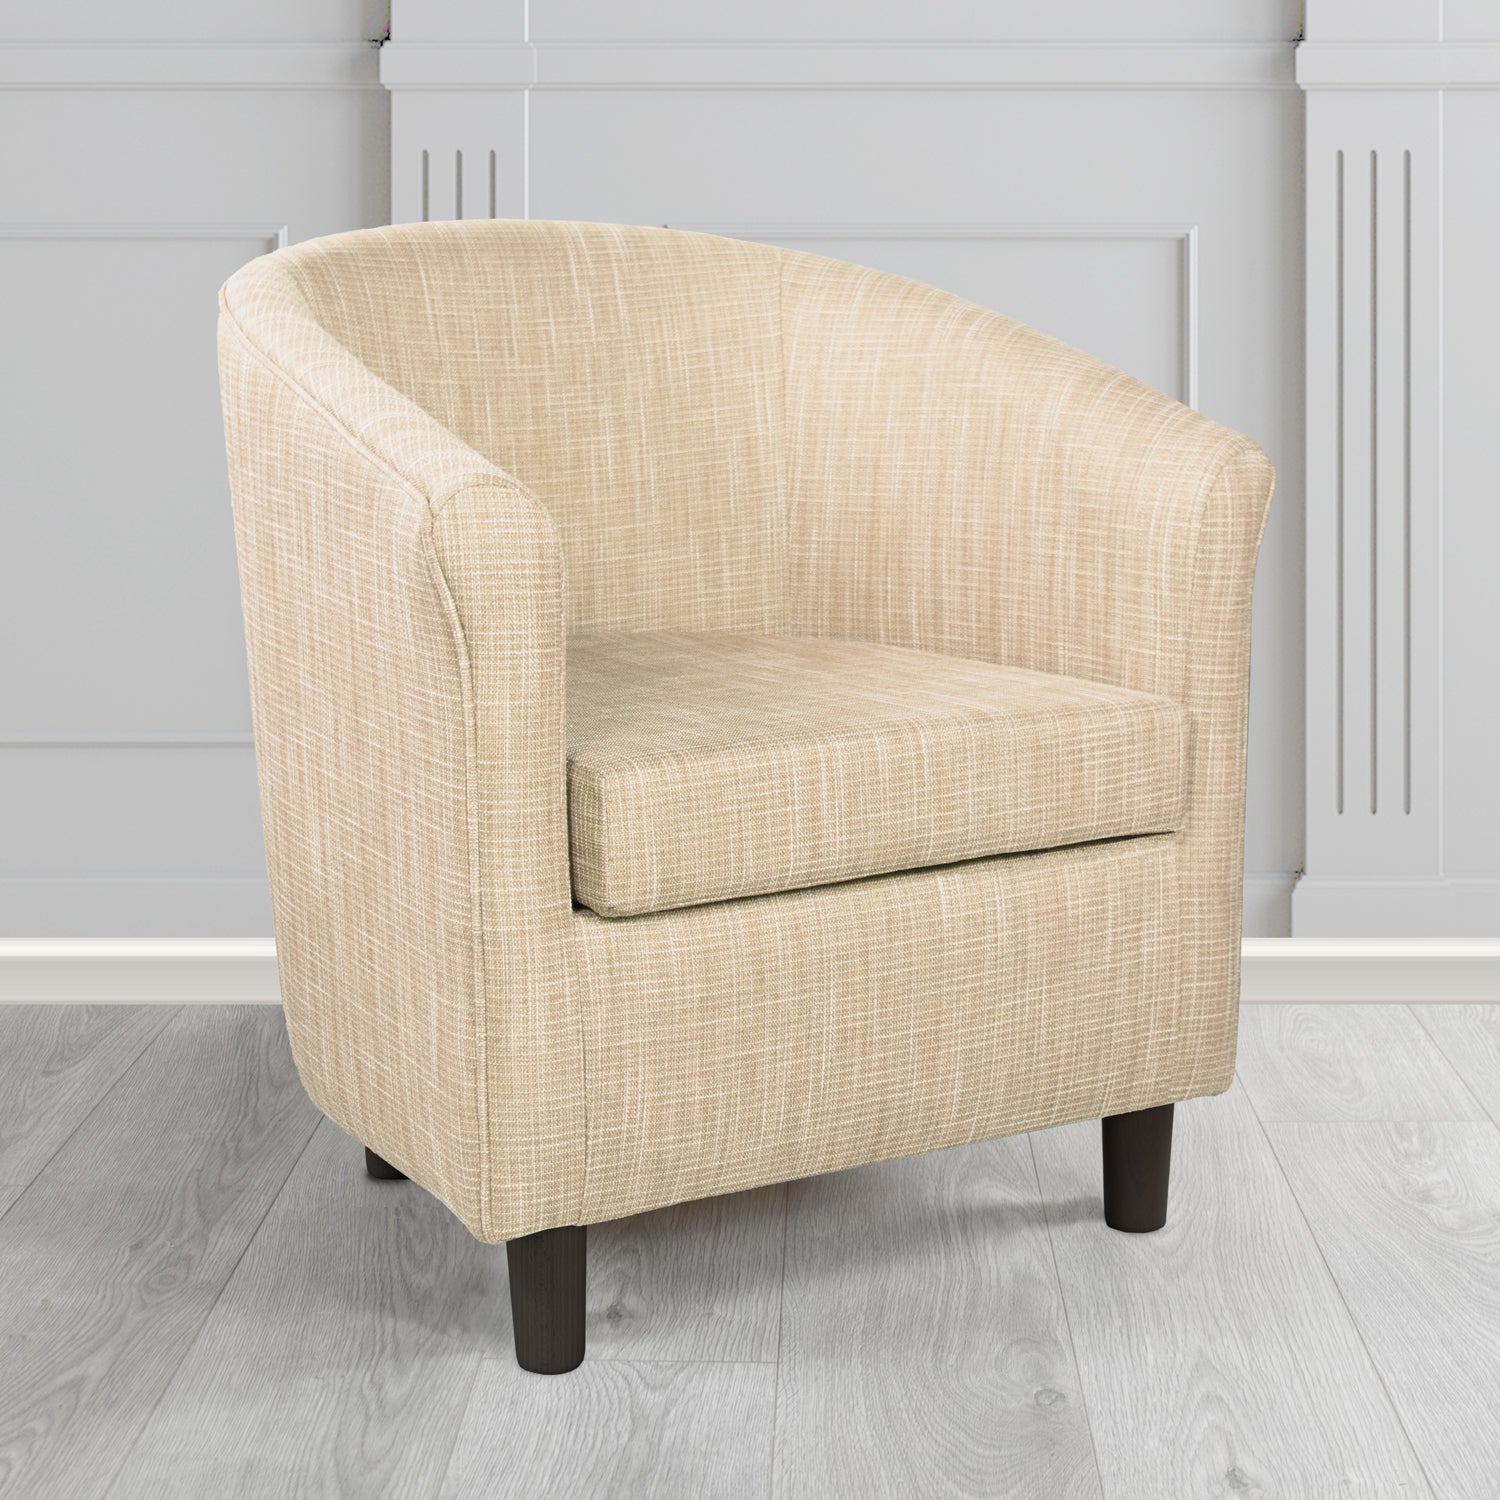 Tuscany Ravel Hessian Contract Crib 5 Fabric Tub Chair - Antimicrobial & Water-Resistant - The Tub Chair Shop